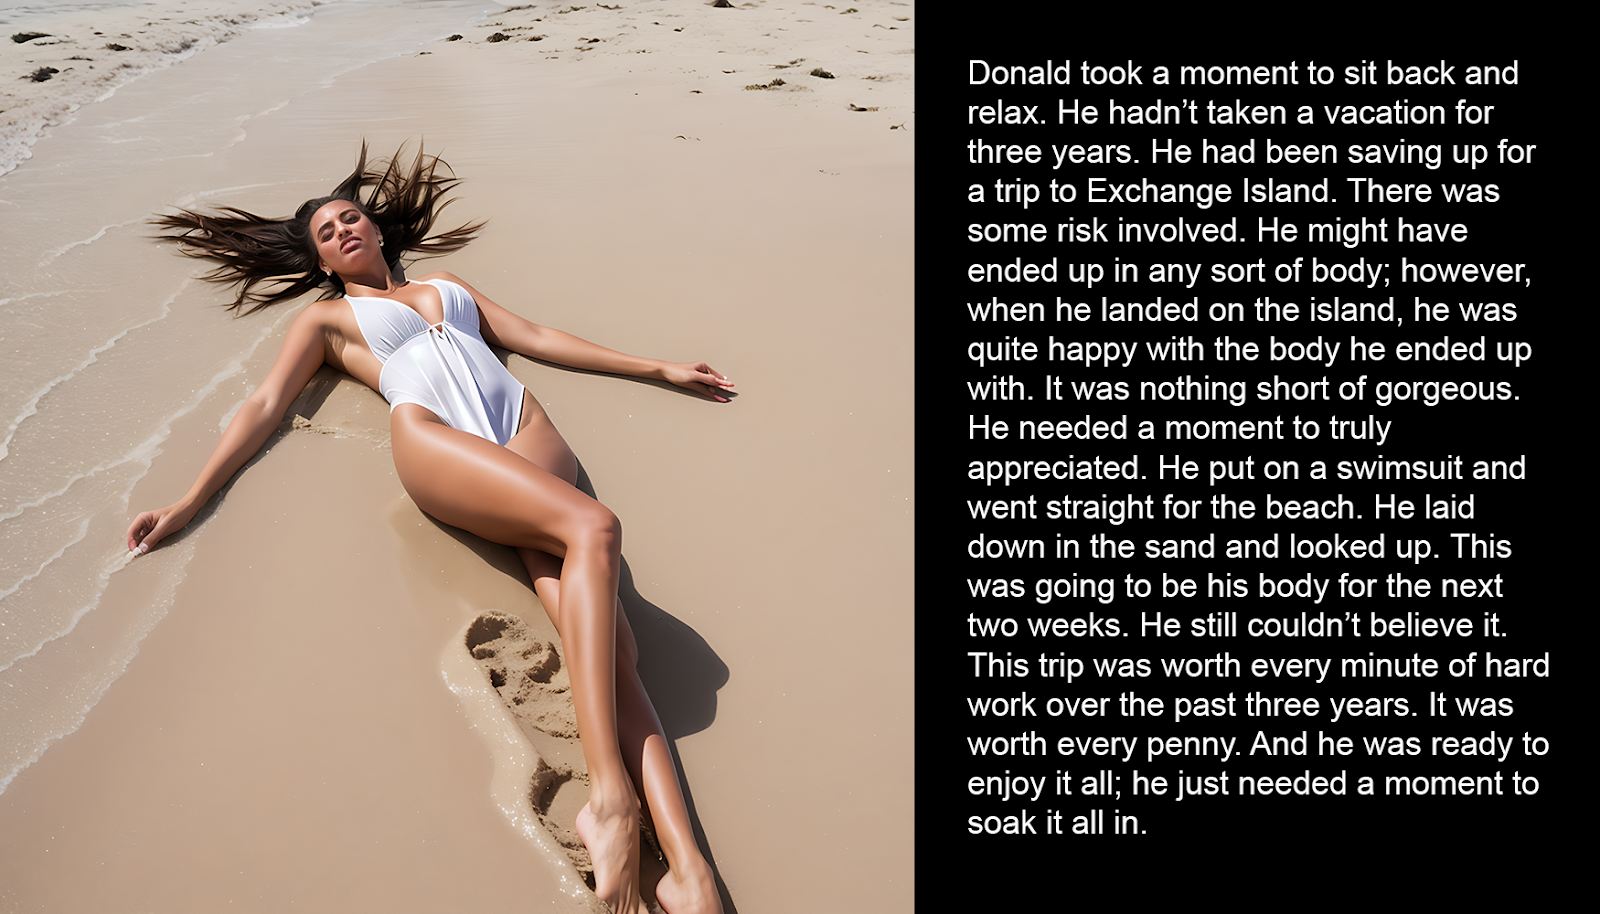 Donald took a moment to sit back and relax. He hadn’t taken a vacation for three years. He had been saving up for a trip to Exchange Island. There was some risk involved. He might have ended up in any sort of body; however, when he landed on the island, he was quite happy with the body he ended up with. It was nothing short of gorgeous. He needed a moment to truly appreciated. He put on a swimsuit and went straight for the beach. He laid down in the sand and looked up. This was going to be his body for the next two weeks. He still couldn’t believe it. This trip was worth every minute of hard work over the past three years. It was worth every penny. And he was ready to enjoy it all; he just needed a moment to soak it all in.